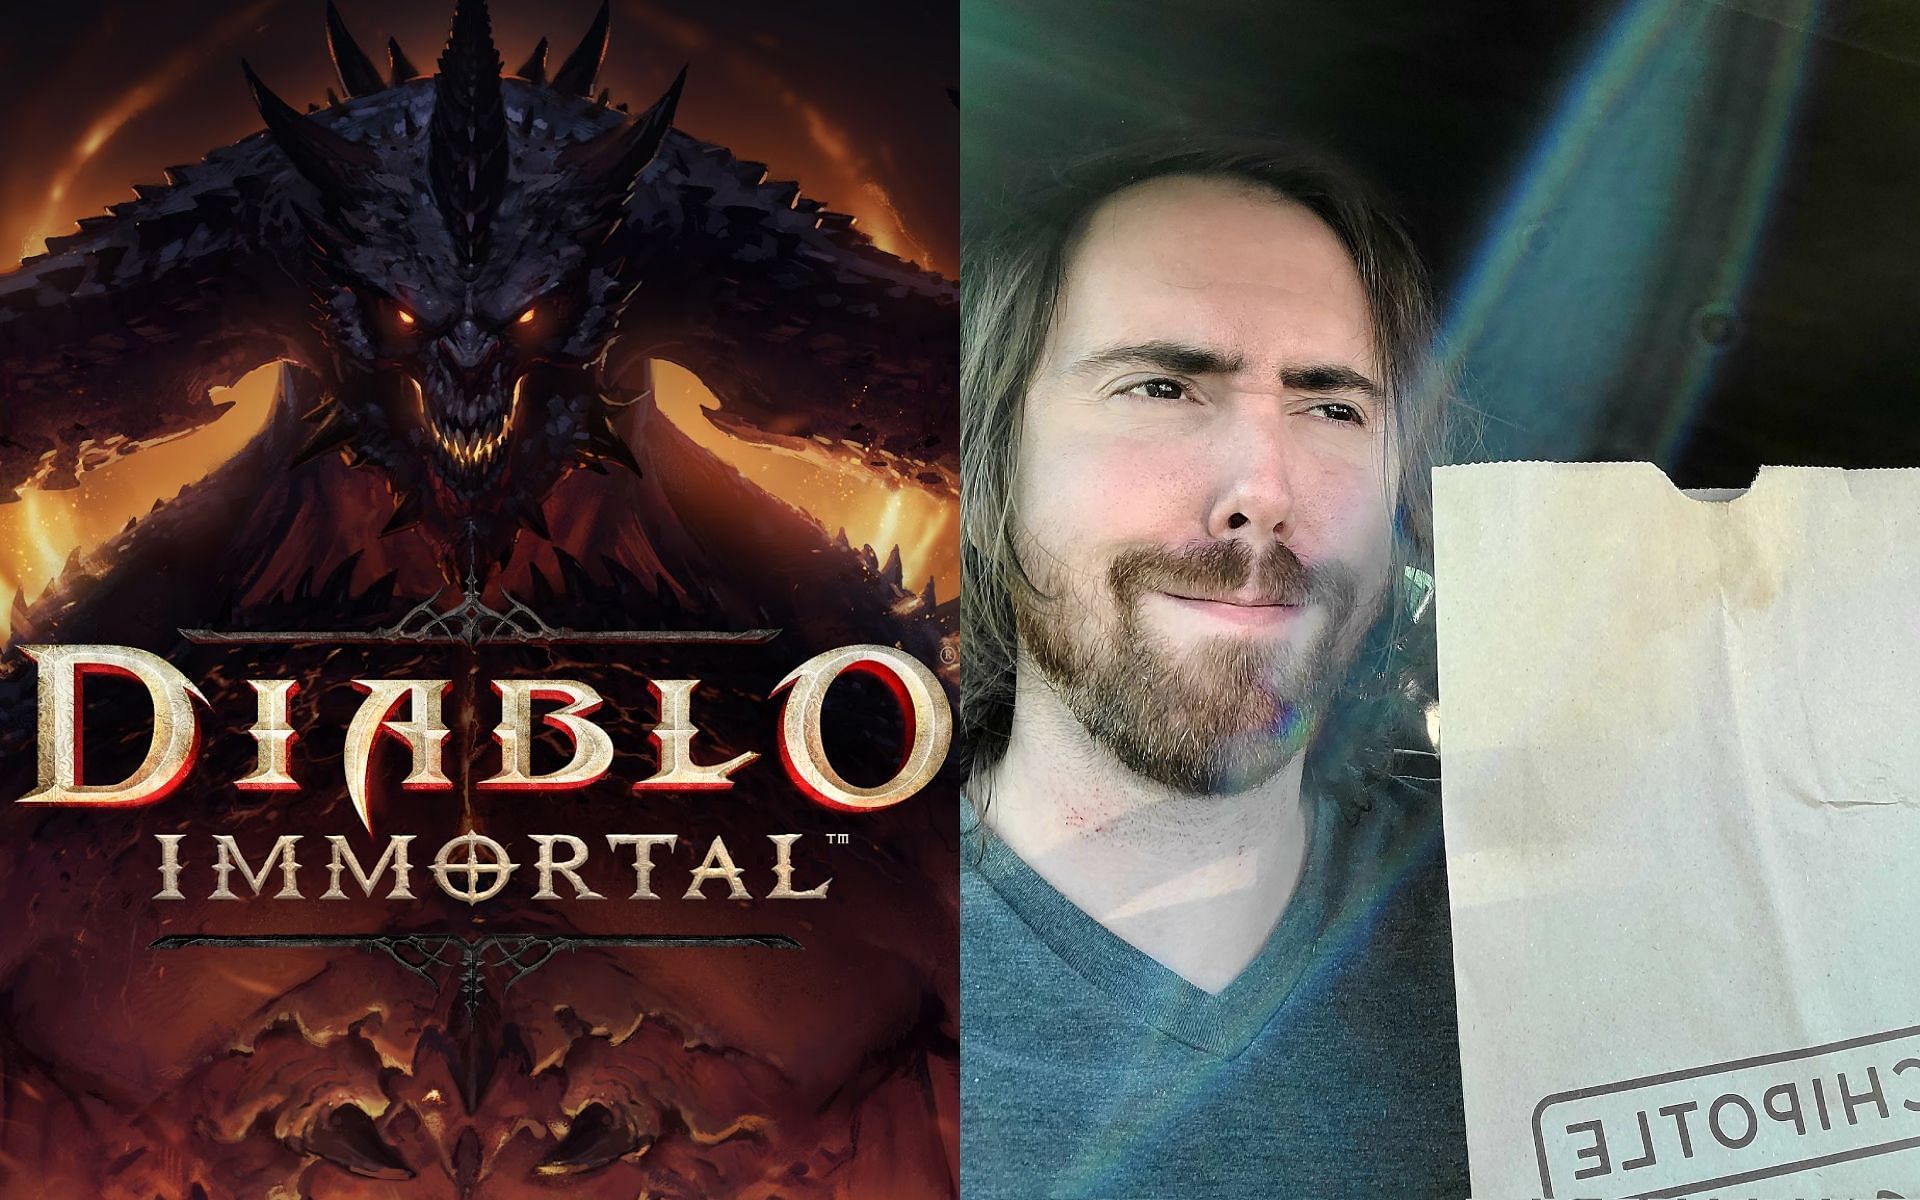 Asmongold recently reacted to a Reddit post claiming Diablo Immortal has been banned in China (Image via Sportskeeda)